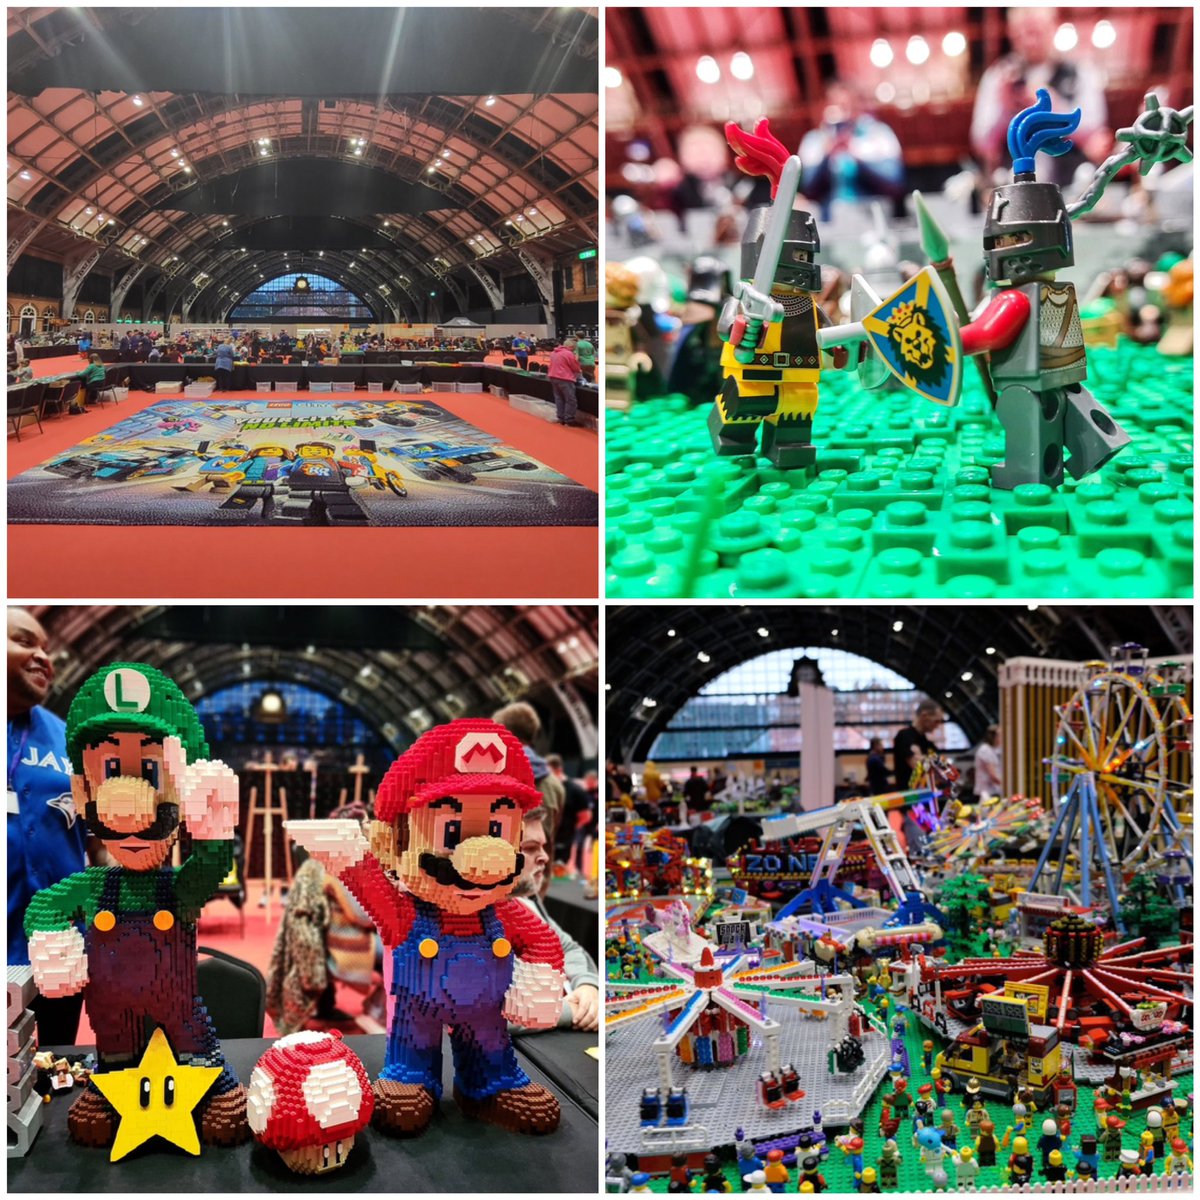 #ThrowbackThursday 🔙 Last month, another incredible @bricktastic event took place under our iconic arches 🧱 We welcomed thousands of LEGO enthusiasts of all ages and 150 LEGO builders from all over the world 👏🏻 It’s always amazing to see all of the amazing creations!